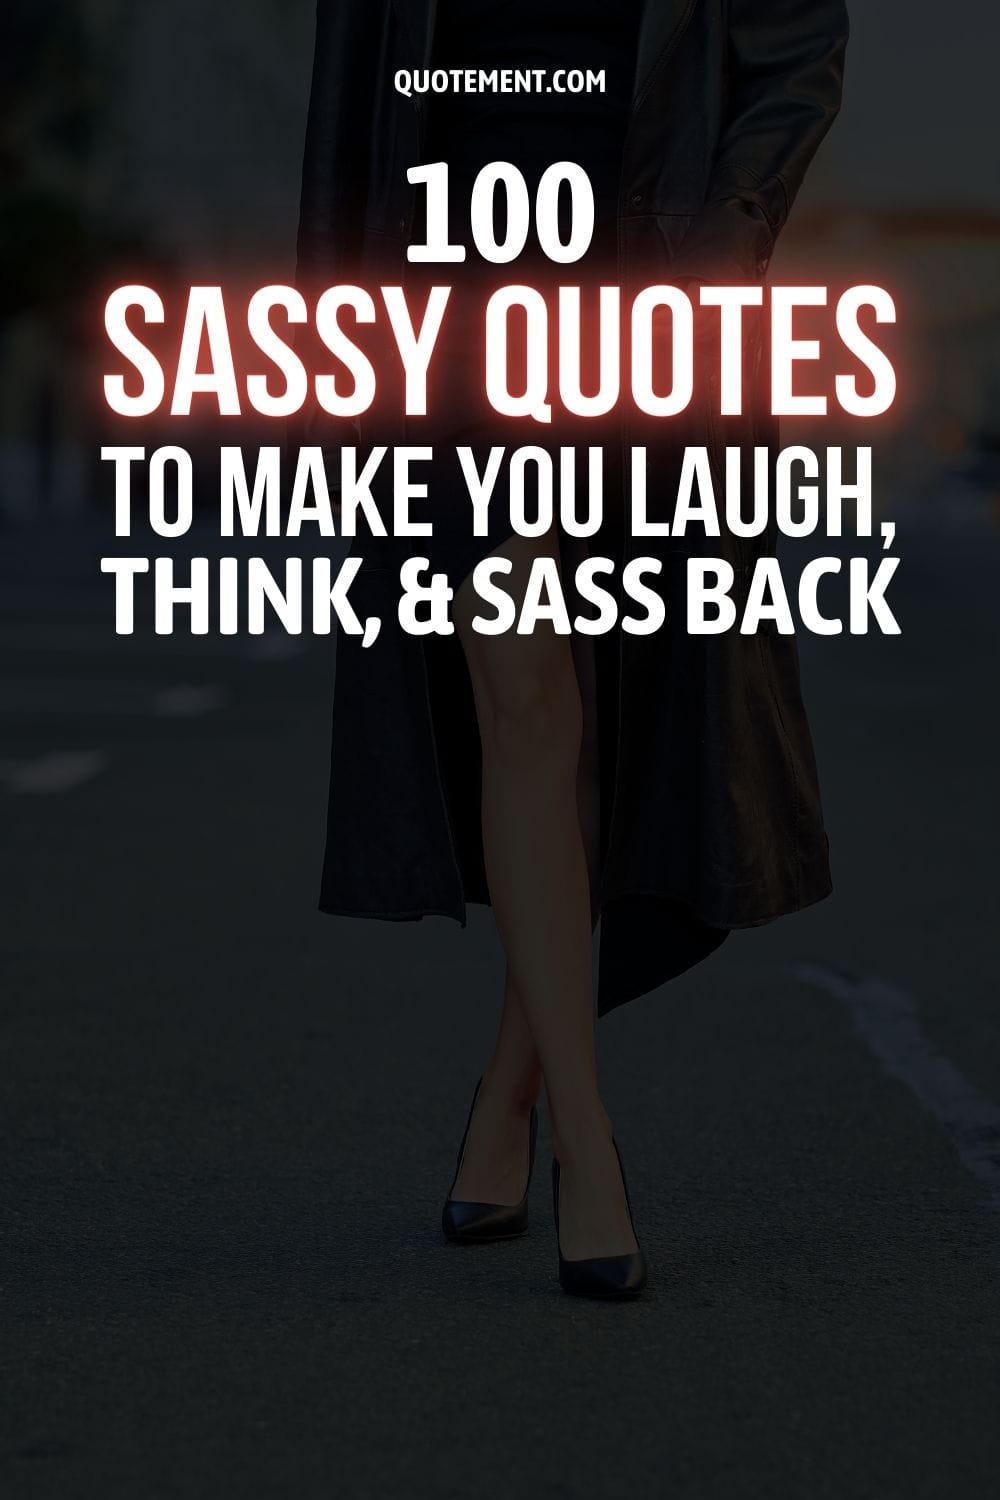 100 Sassy Quotes to Make You Laugh, Think, and Sass Back
